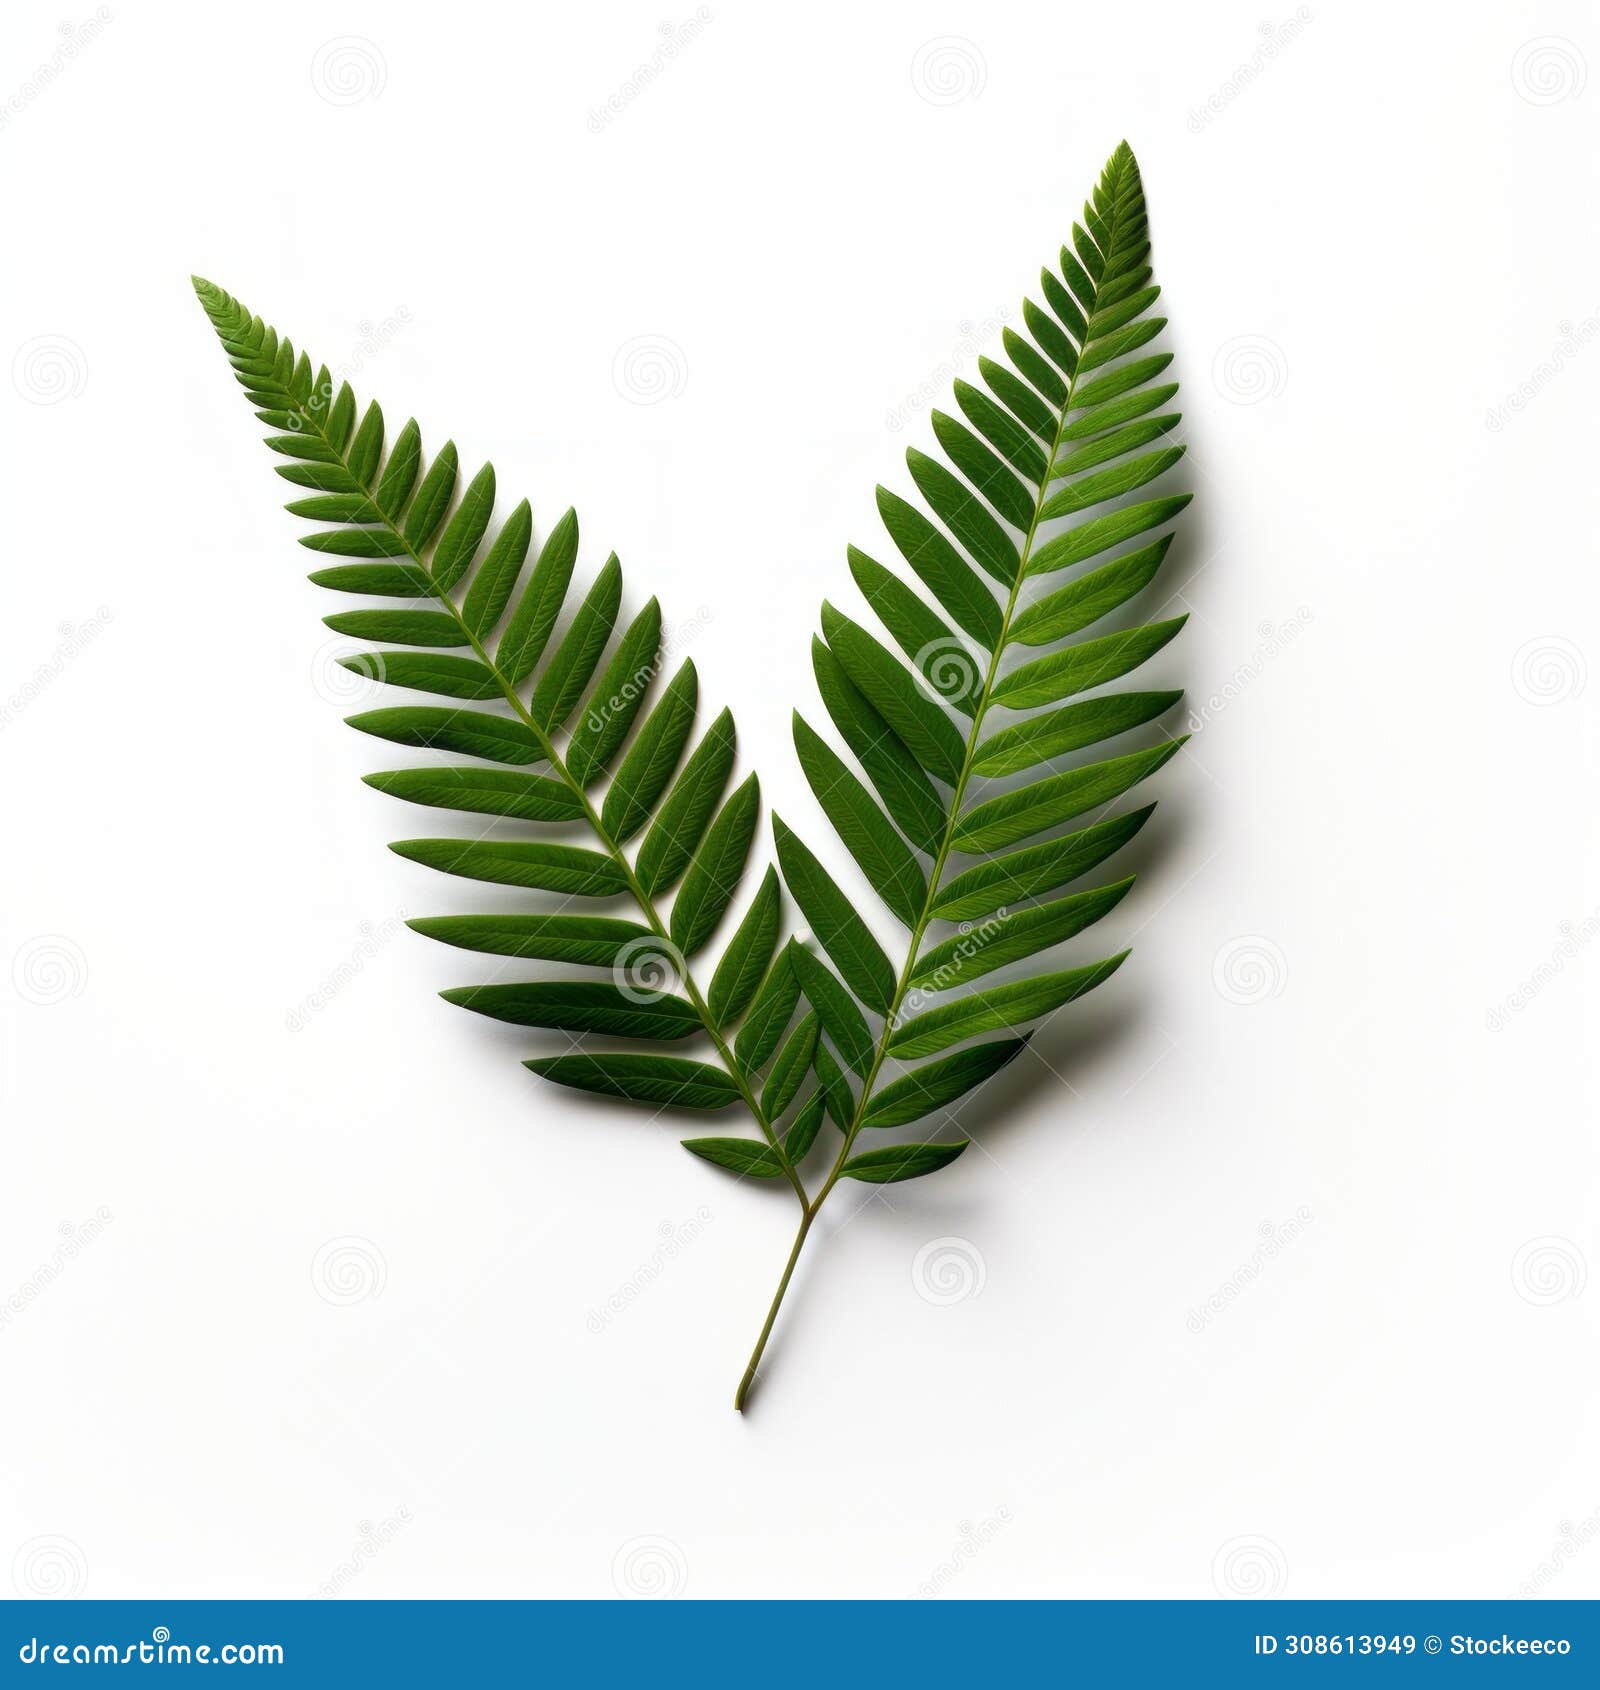 precisionist style: two fern leaves on white background